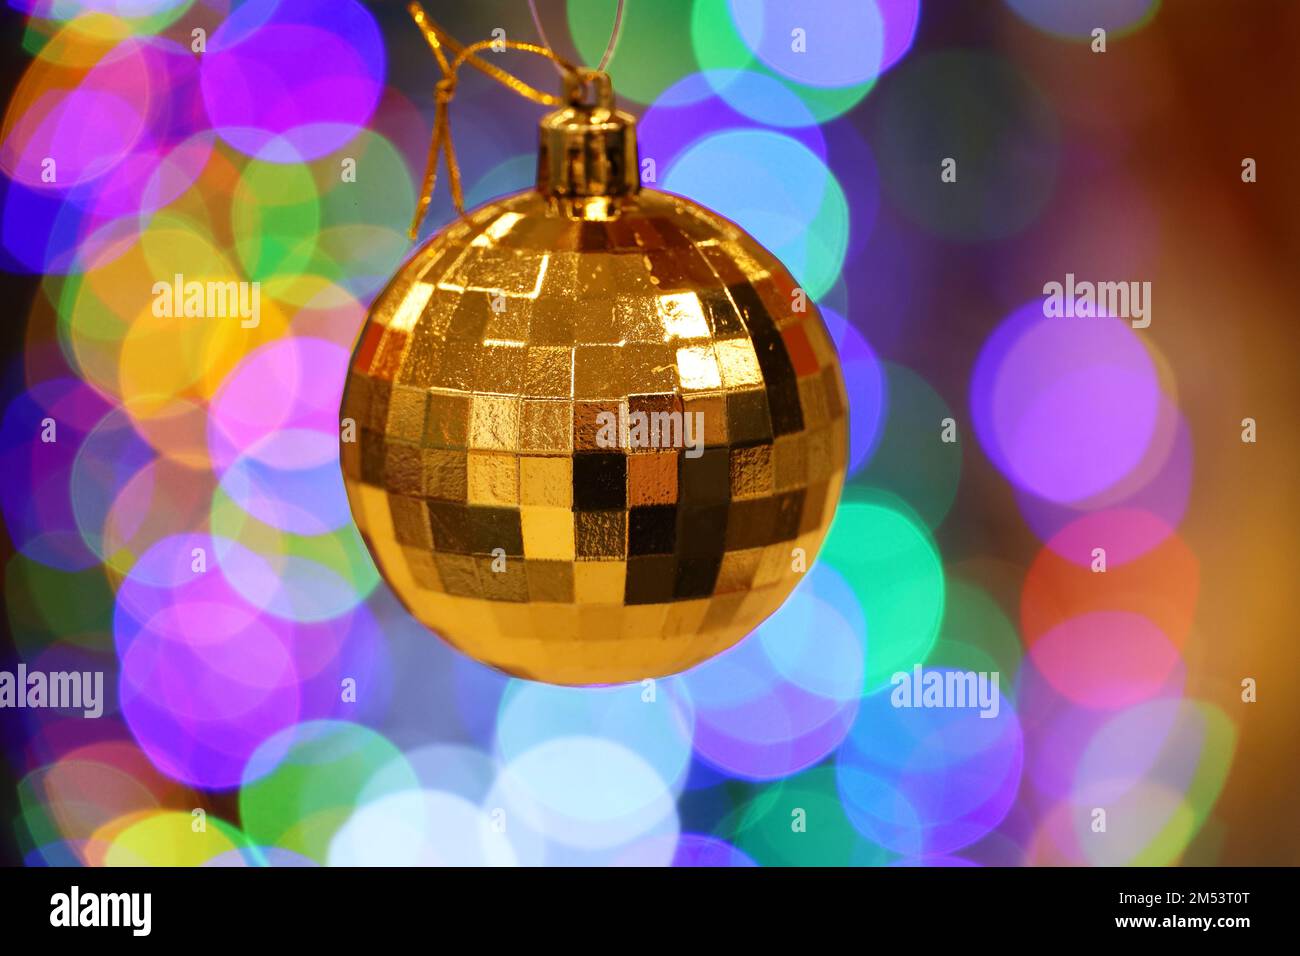 New Year toy, golden mirror ball hanging on blurred festive lights background. Christmas decorations in winter holidays Stock Photo